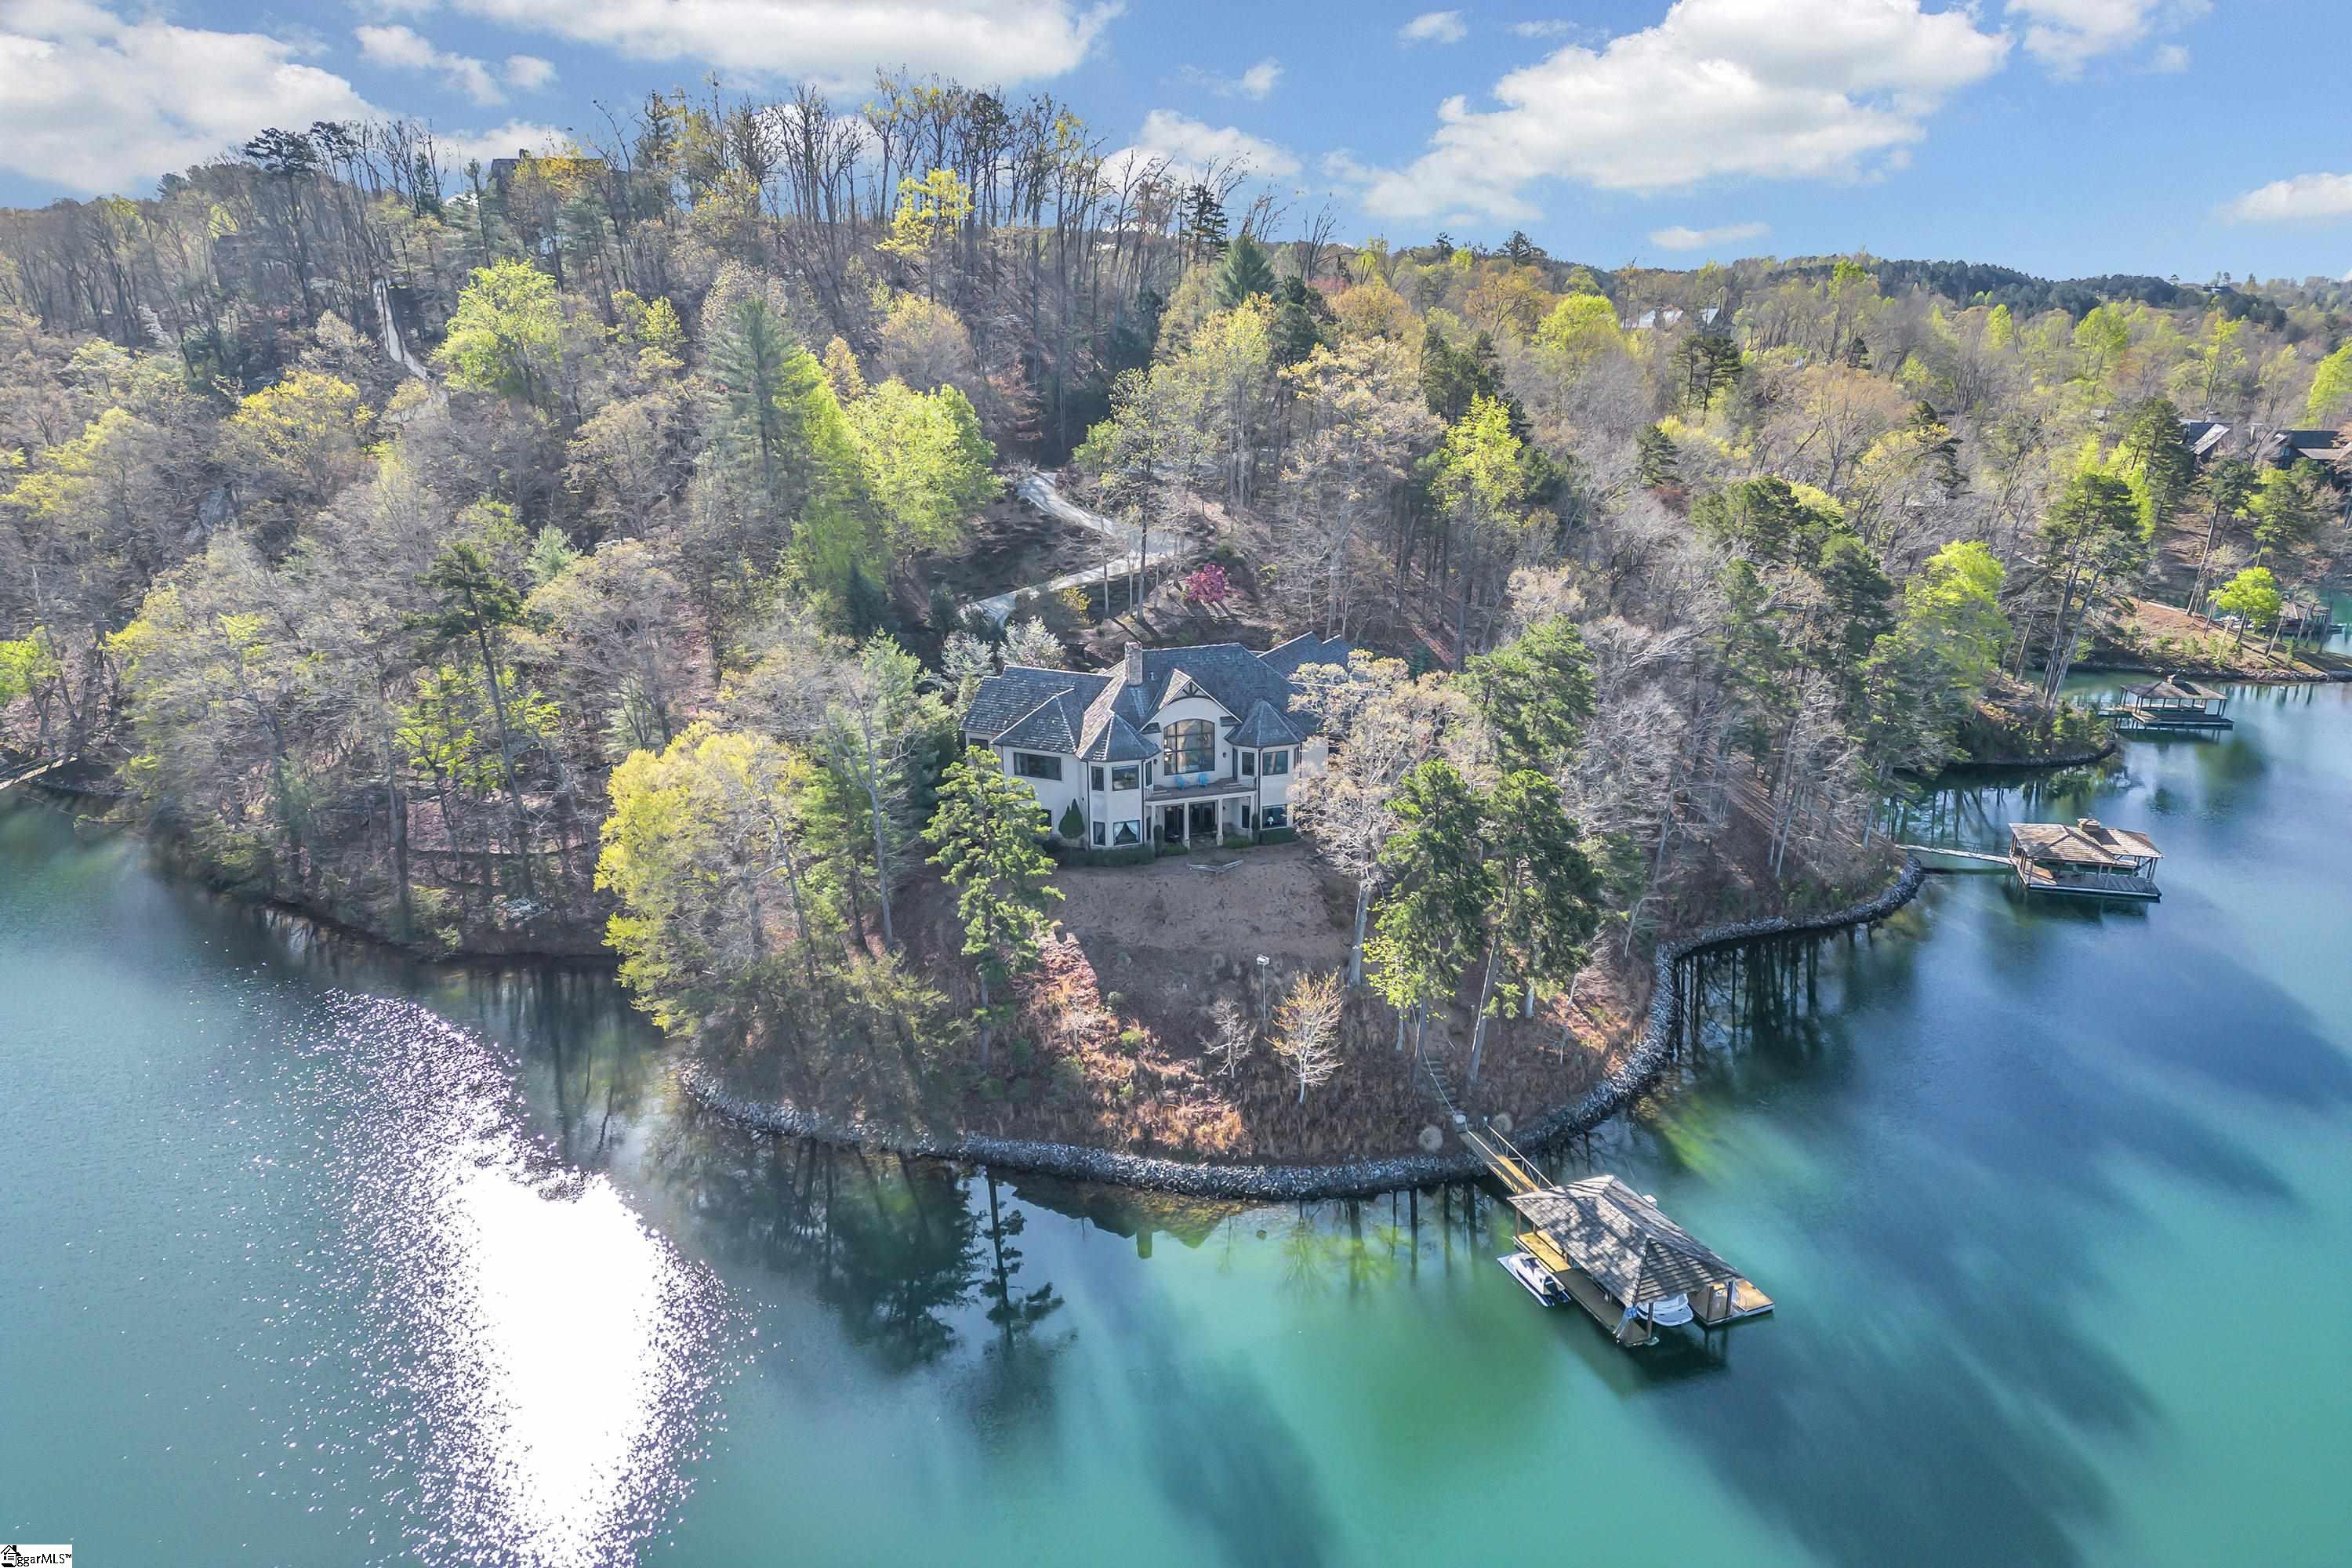 Located on an incredible point lot, 117 Misty Water Loop offers expansive and enviable views of serene open water. The front entrance with its commanding double doors gives the feel of a grand mountain lodge while striking turrets facing Lake Keowee are reminiscent of the European countryside. This home’s story is one of shape and texture as architectural details elevate both the exterior and interior spaces. With the distant Blue Ridge Mountains providing a wondrous backdrop, it is surrounded by idyllic landscaping.  Inside, a soft archway welcomes you to a vast open area where the big water itself is naturally part of the ambiance. The great room is anchored by a stone fireplace and has a built-in entertainment center and shelves and a refined vaulted ceiling juxtaposed beautifully with rustic beams. Have your morning meal or beverage in a bed and breakfast setting as you soak in the scenery from the dining area or spacious bar. The kitchen is equipped with a double-door stainless KitchenAid refrigerator, a wine refrigerator, a double oven, a five-burner Dacor gas cooktop, a large island with its own sink, a new dishwasher, soft-closing drawers, a walk-in pantry, and pendant and recessed lighting.  Warm hardwoods draw you through the main floor where you’ll find a soothing study with built-in shelving, cabinets, and a credenza, along with another splendid perspective of the water. Also located on the main level, the master suite features a wonderfully spacious walk-in closet/dressing area with tasteful storage solutions that make organization simple. Among the amenities of the master bath are heated floors, a zero-threshold walk-in shower with body sprayers, an inviting tub, and custom cabinetry.  A sweeping, curved staircase adds an elegant touch of distinction, but you can also take the elevator to the lower level where there are three bedrooms, two full baths, and an immense recreation room with 12-foot ceilings, tile flooring, a fireplace, and a bar. This area has a personality of its own but fits the character of this gorgeous property. The lower level also has a climate-controlled 2,000-bottle wine cellar, a workshop with room to provide inspiration for any project, utilities including two water heaters, and storage.  The three-car garage has epoxy flooring, a 50-amp charging station for an electric car, and an unfinished area above it that could be converted from storage to living space. The driveway has been replaced with concrete and expanded. The washer and dryer are new, and there’s ample storage, along with countertops for sewing, gift-wrapping, or any task made less laborious by the large laundry room. Additional highlights include a central vacuum, a new generator that serves the entire house, speakers throughout the home, and Pella windows.  In addition to the plethora of interior options, you can enjoy thoughtfully designed exterior sites on both levels where the vistas are immersive. The screened-in porch has a fireplace, a covered area with doors for the TV, and a grilling deck. All the decking is maintenance-free Trex®. Lower-level patios and boulder steps make for easy access to 288 feet of perfectly finished, riprapped shoreline via a high-quality Ipe wood Reserve dock with a cedar shake roof. Don’t let too many sunsets pass without a view from Misty Water Loop.  This property has Full Membership allowing buyer to purchase Premier, Sports or Social Membership at closing.